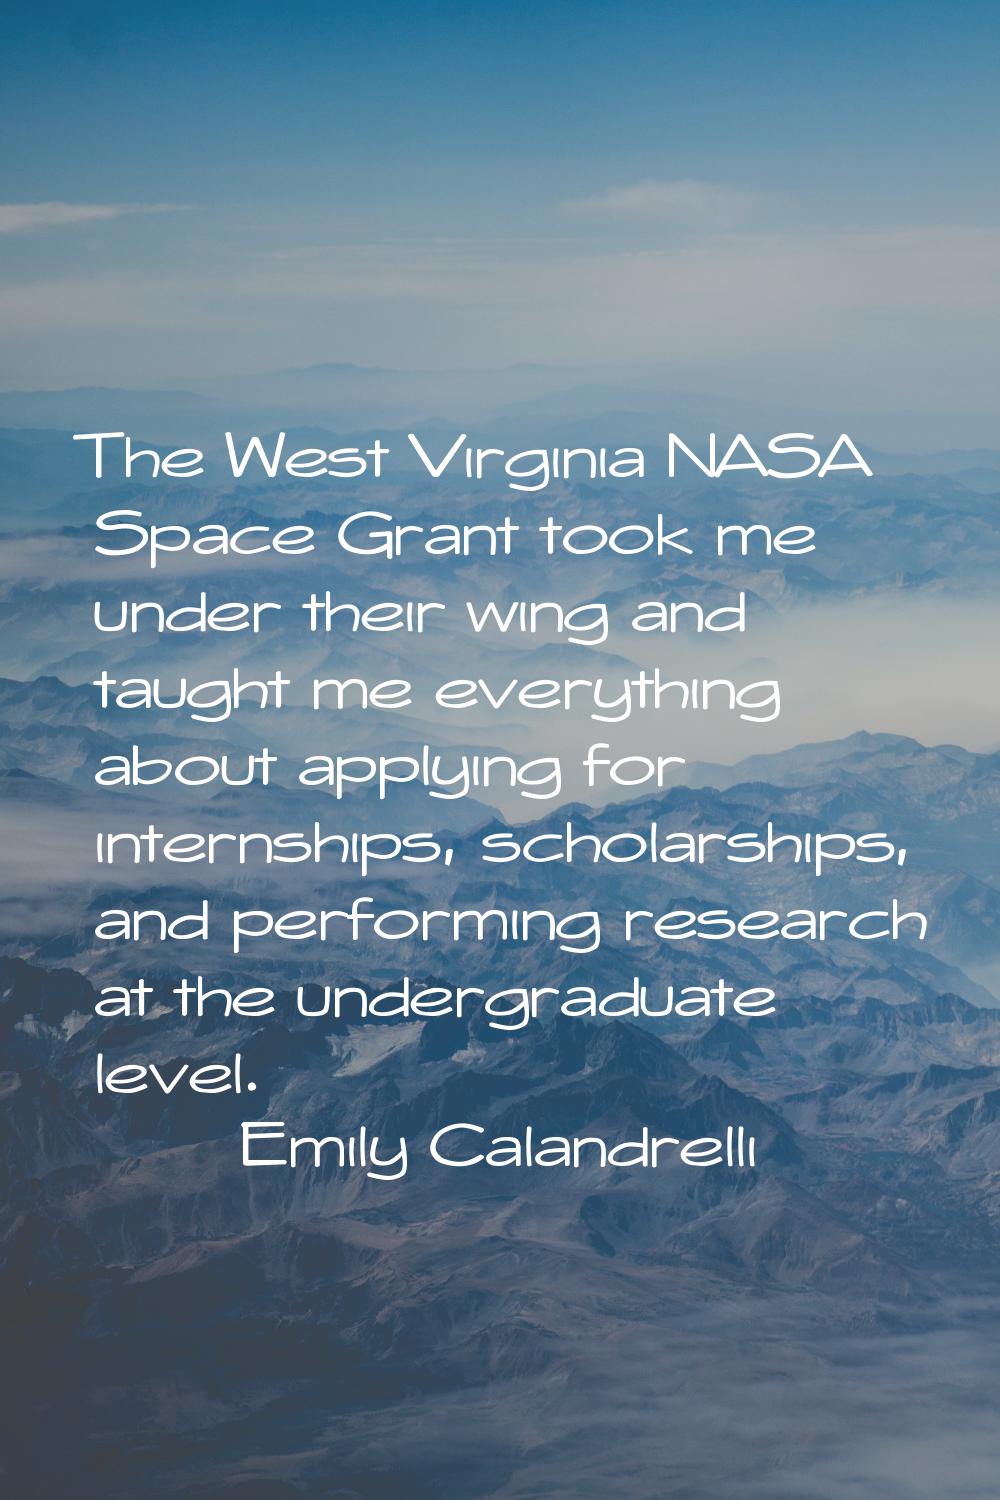 The West Virginia NASA Space Grant took me under their wing and taught me everything about applying